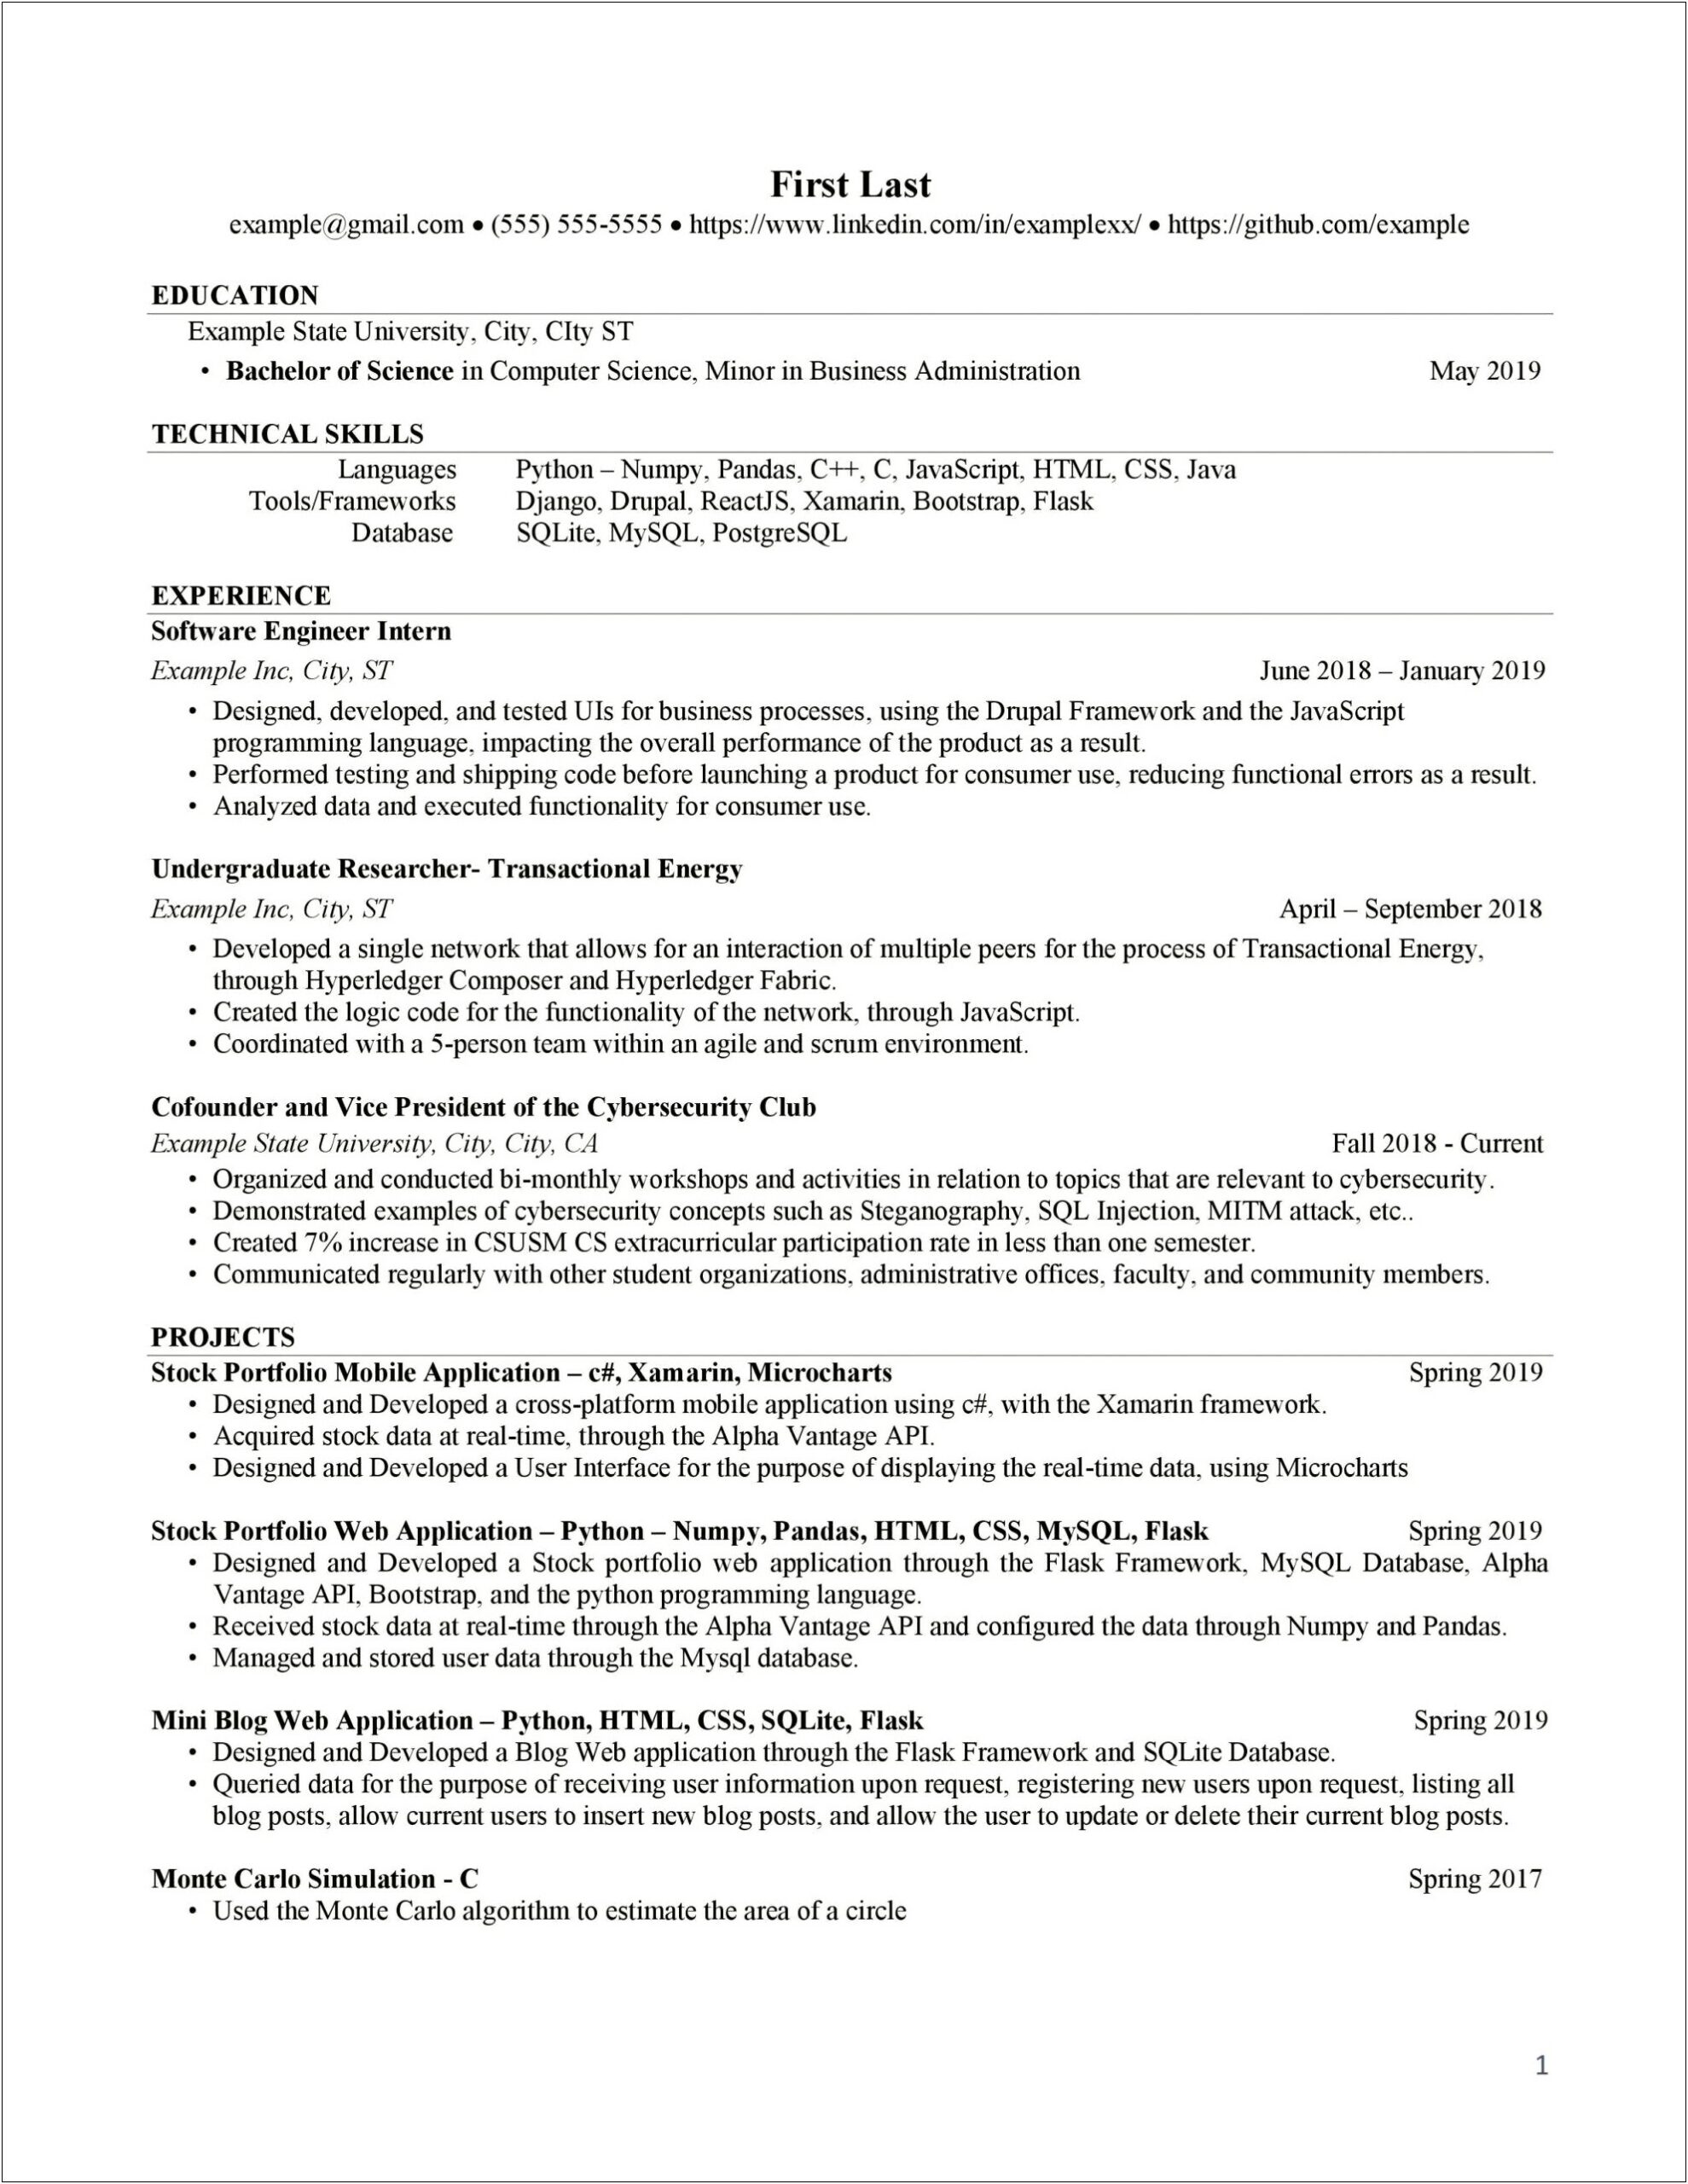 Engineering Resume With No Experience Reddit